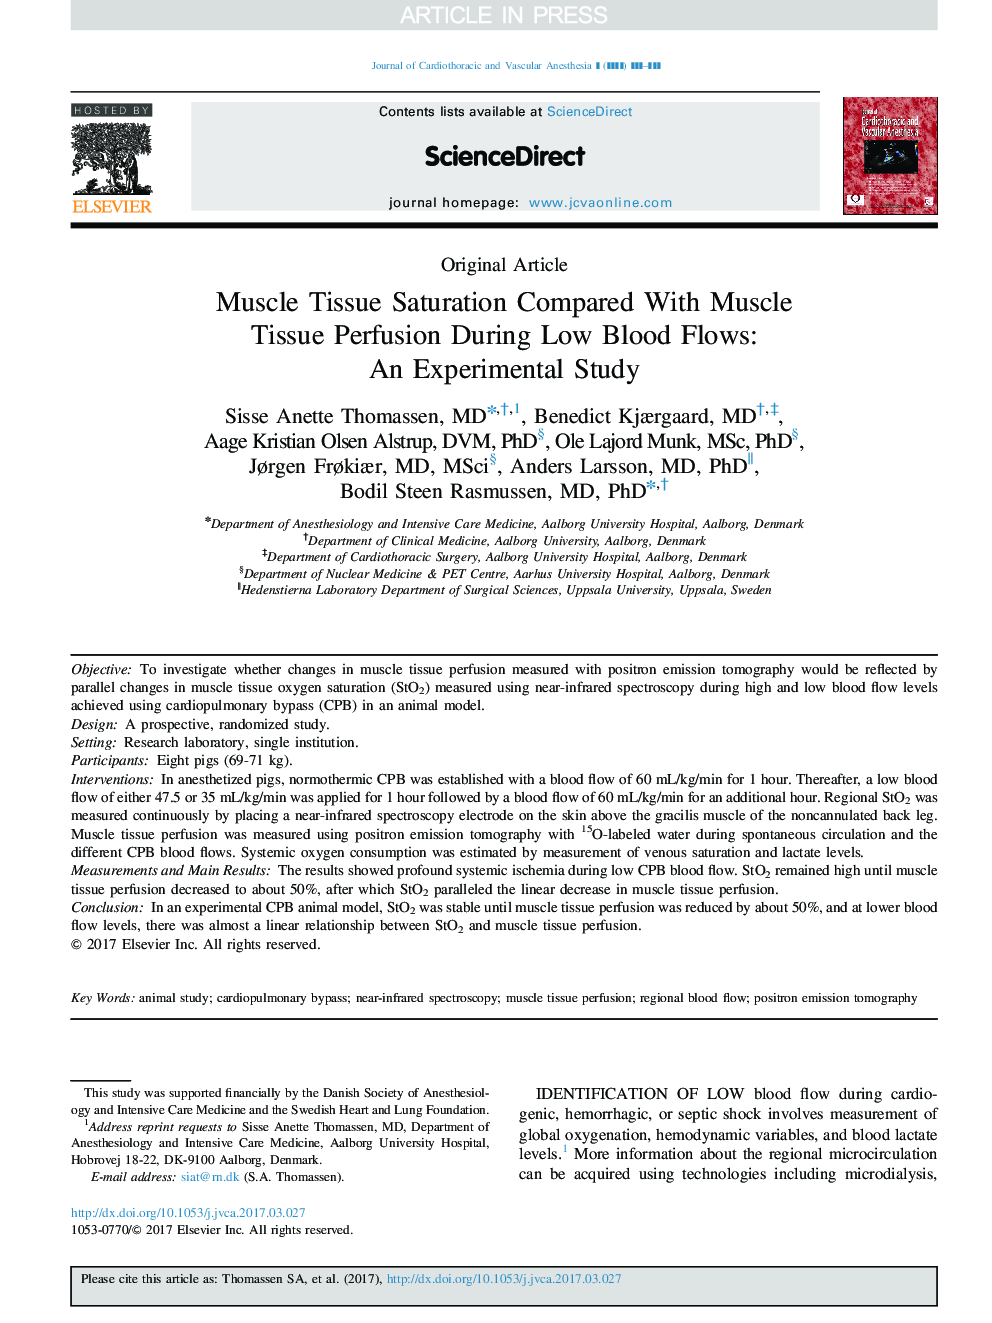 Muscle Tissue Saturation Compared With Muscle Tissue Perfusion During Low Blood Flows: An Experimental Study